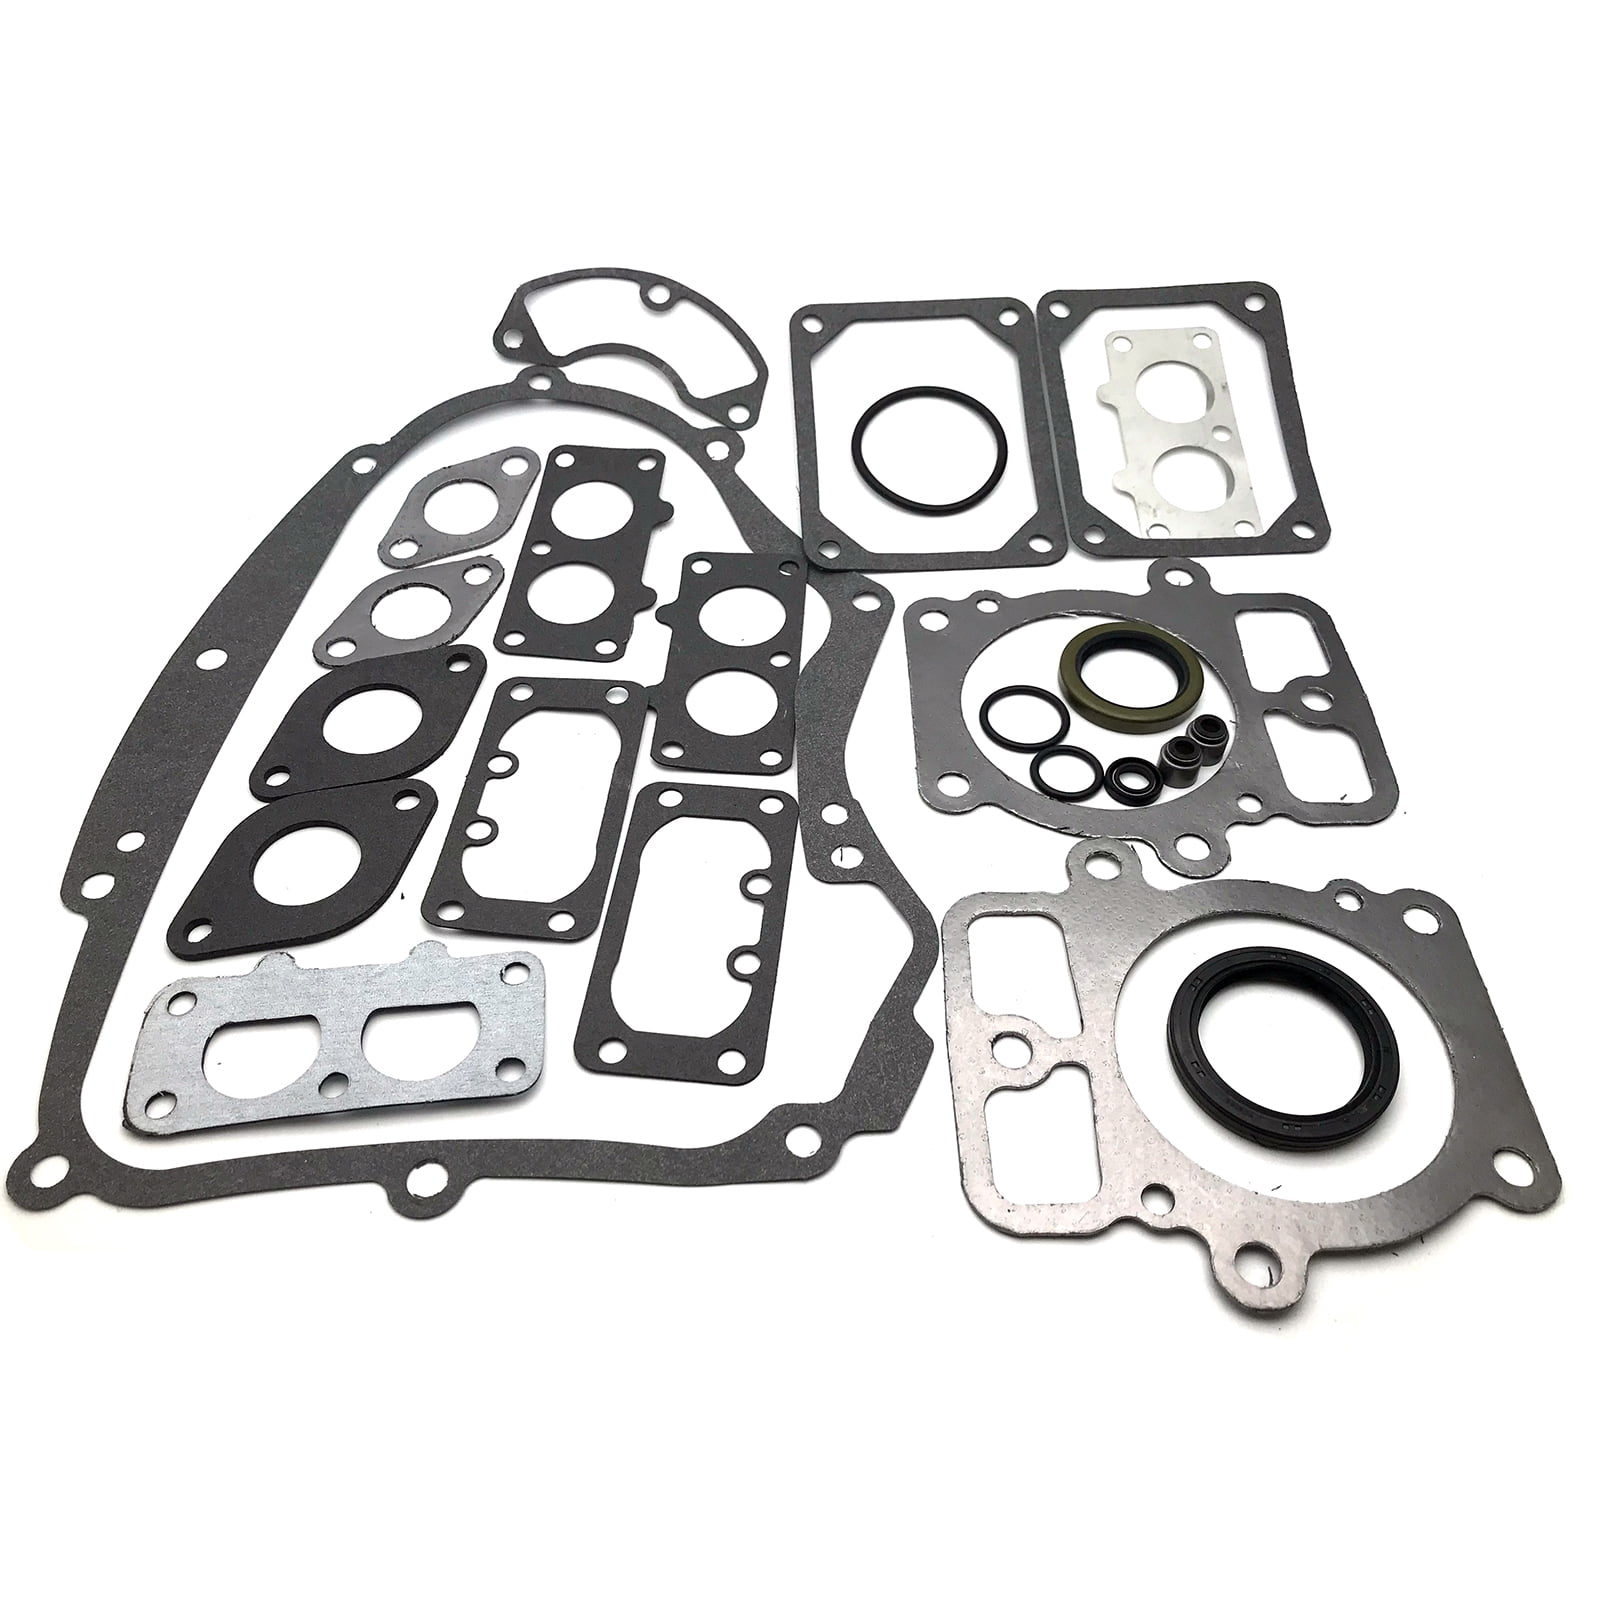 Engine Gaskets Set Replace 499889 For Briggs & Stratton 694012  405777-0129 